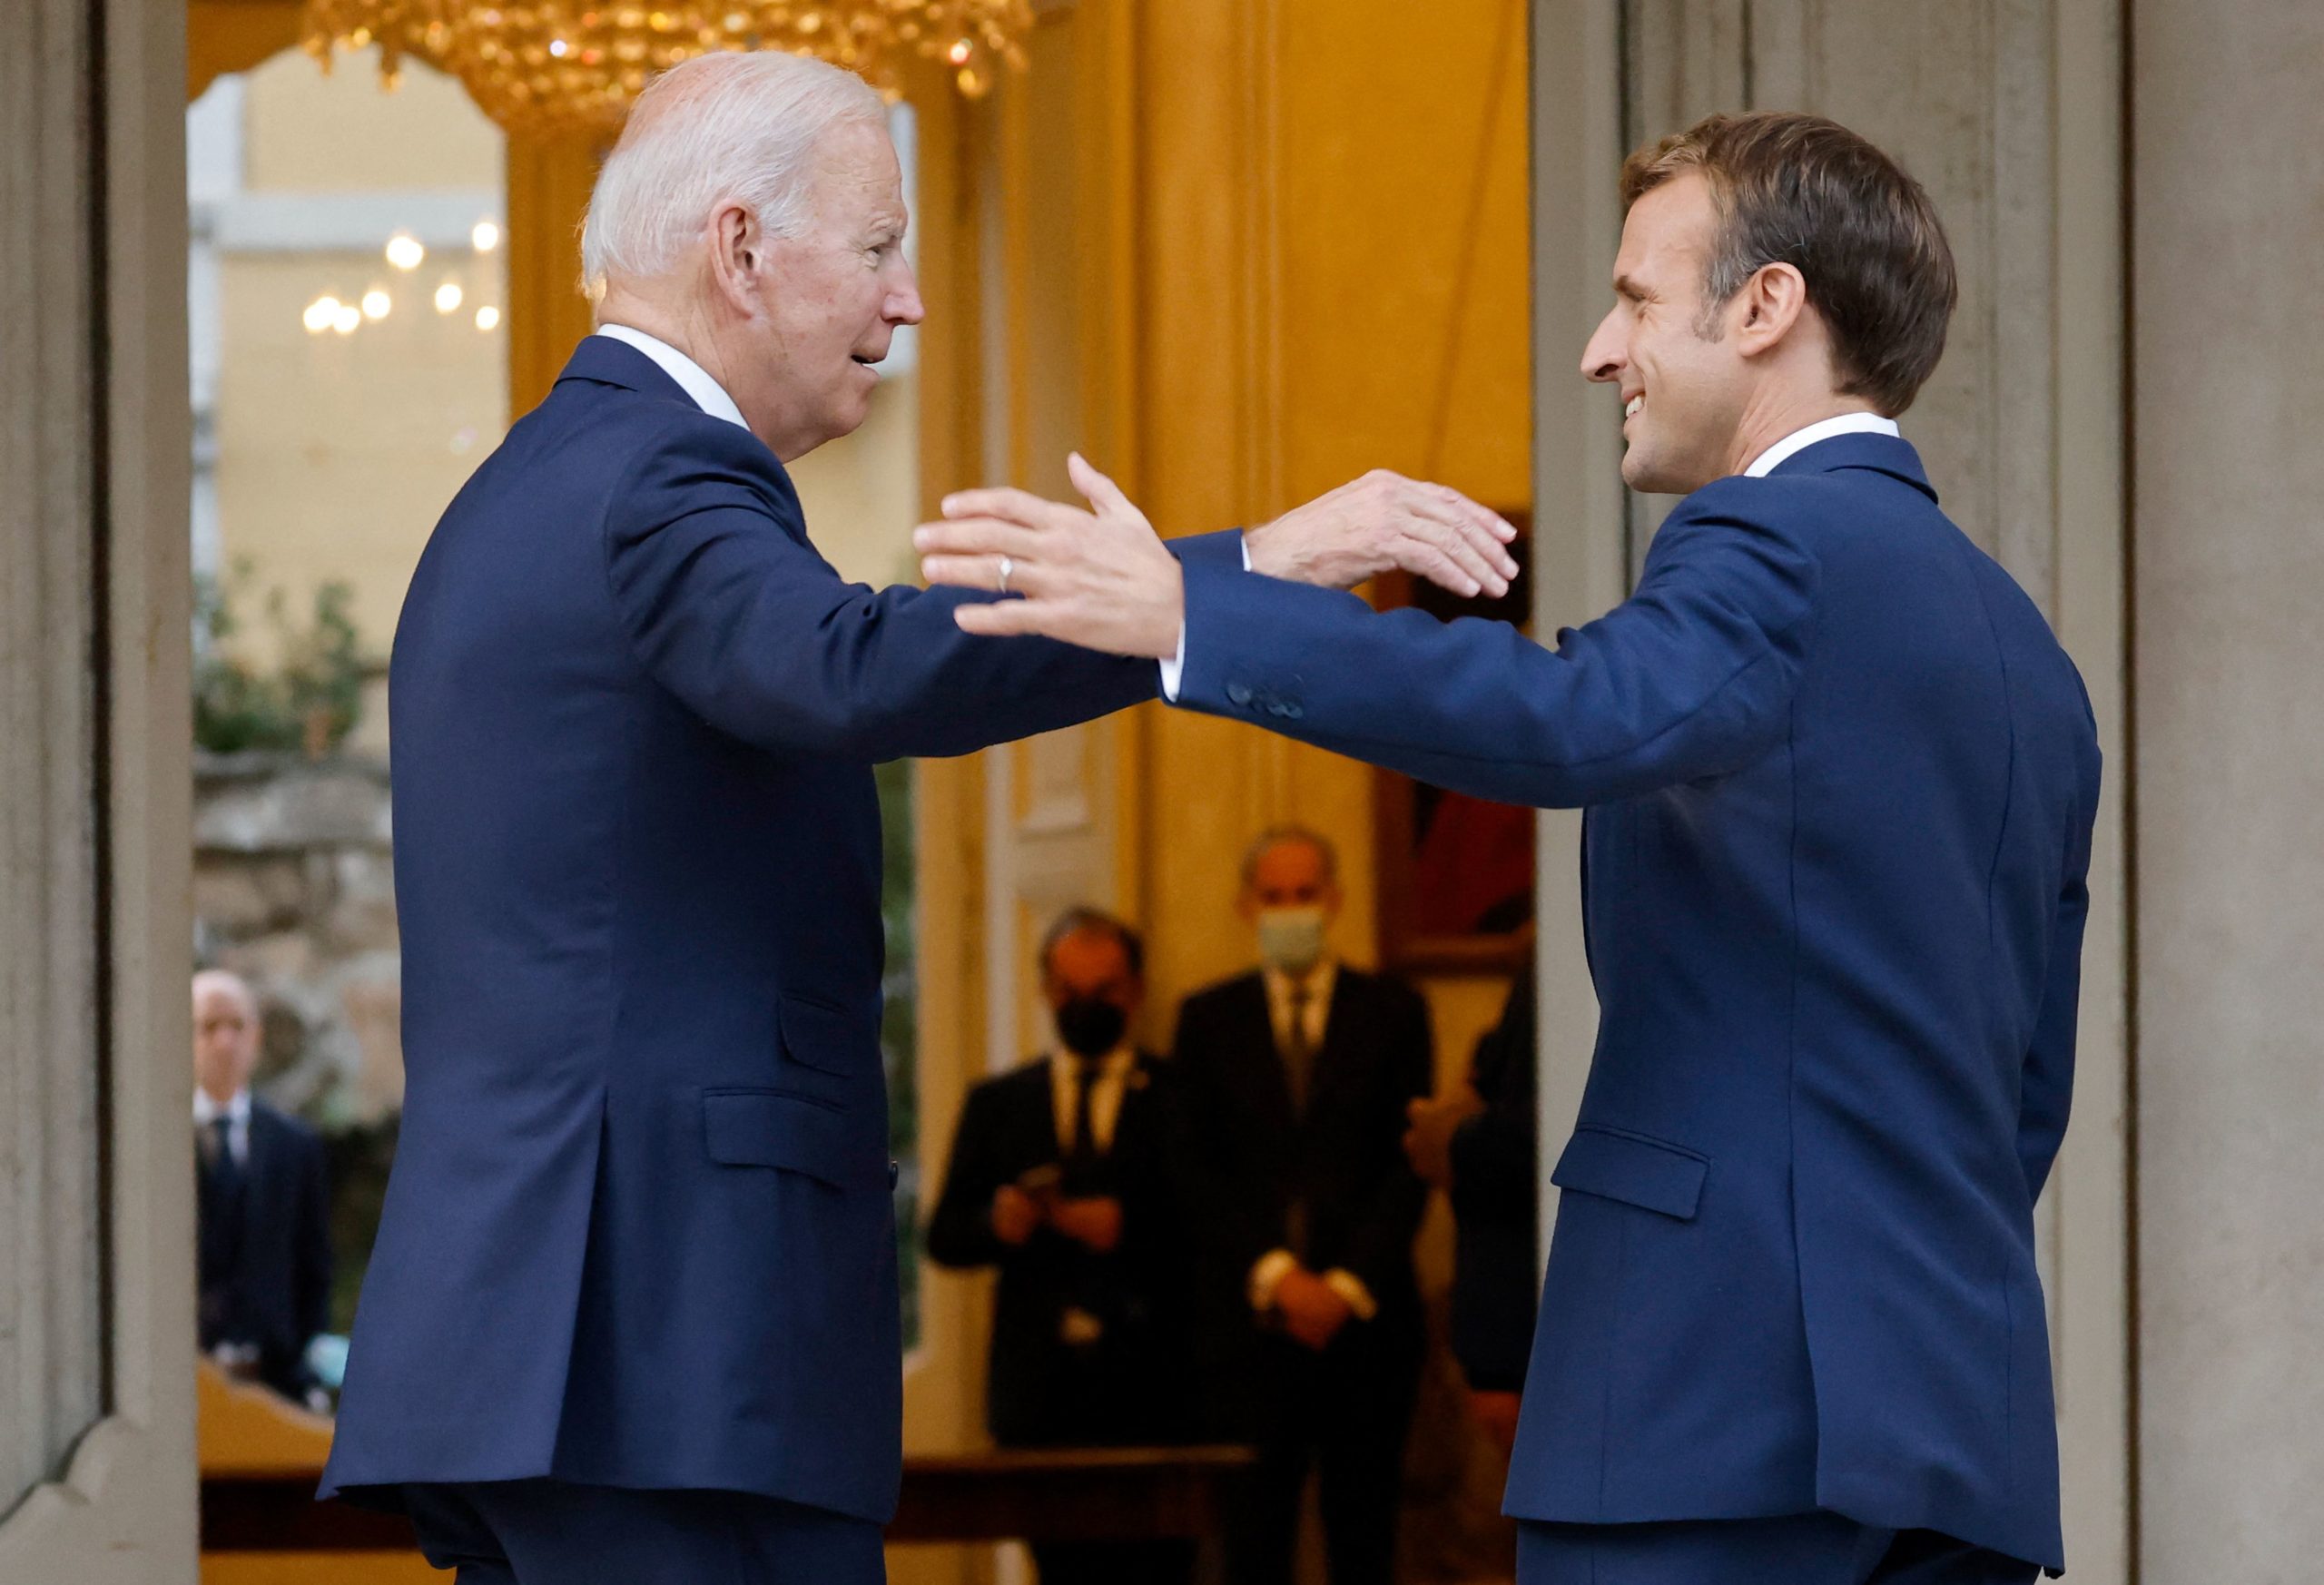 President Joe Biden arrives at the French Embassy in the Vatican in Rome on Friday ahead of a climate conference. (Ludovic Marin/AFP via Getty Images)